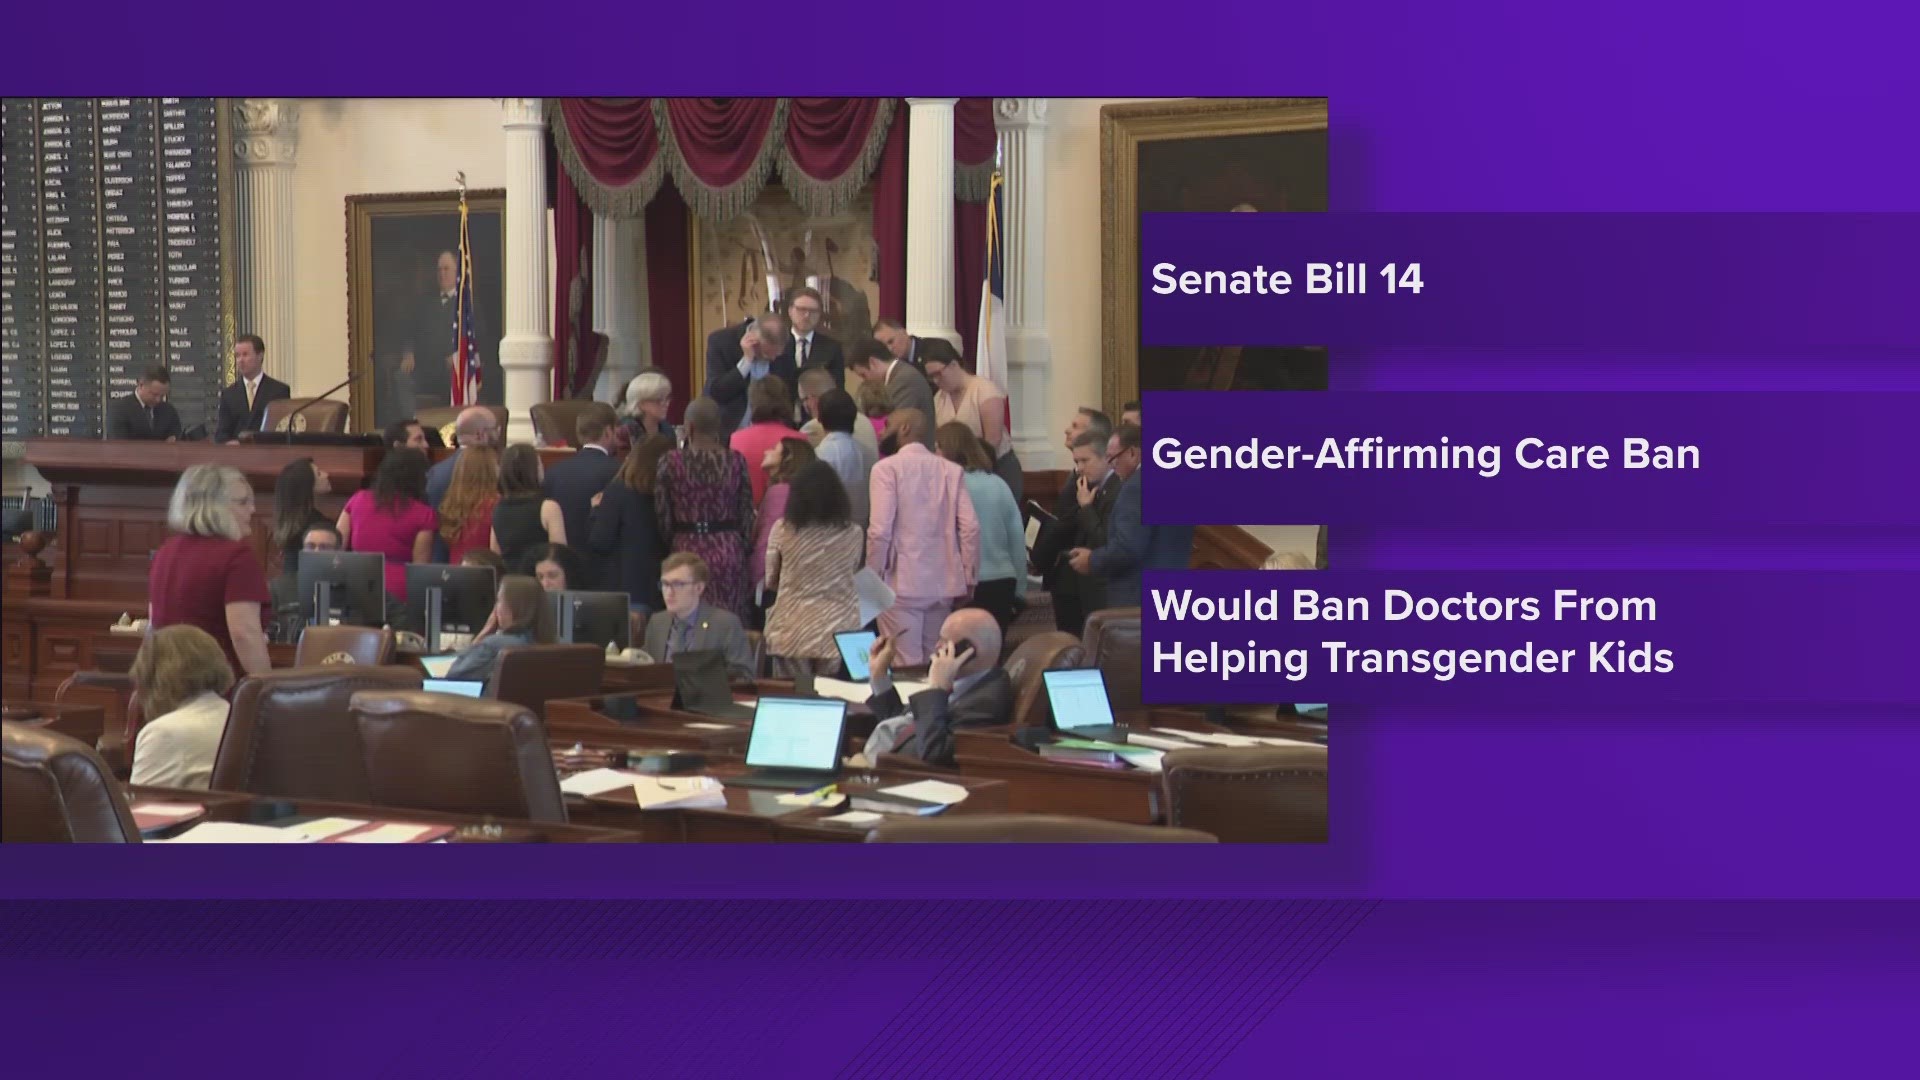 Senate Bill 14, which bans gender-affirming care for minors, returned to the House floor for debate on Friday.